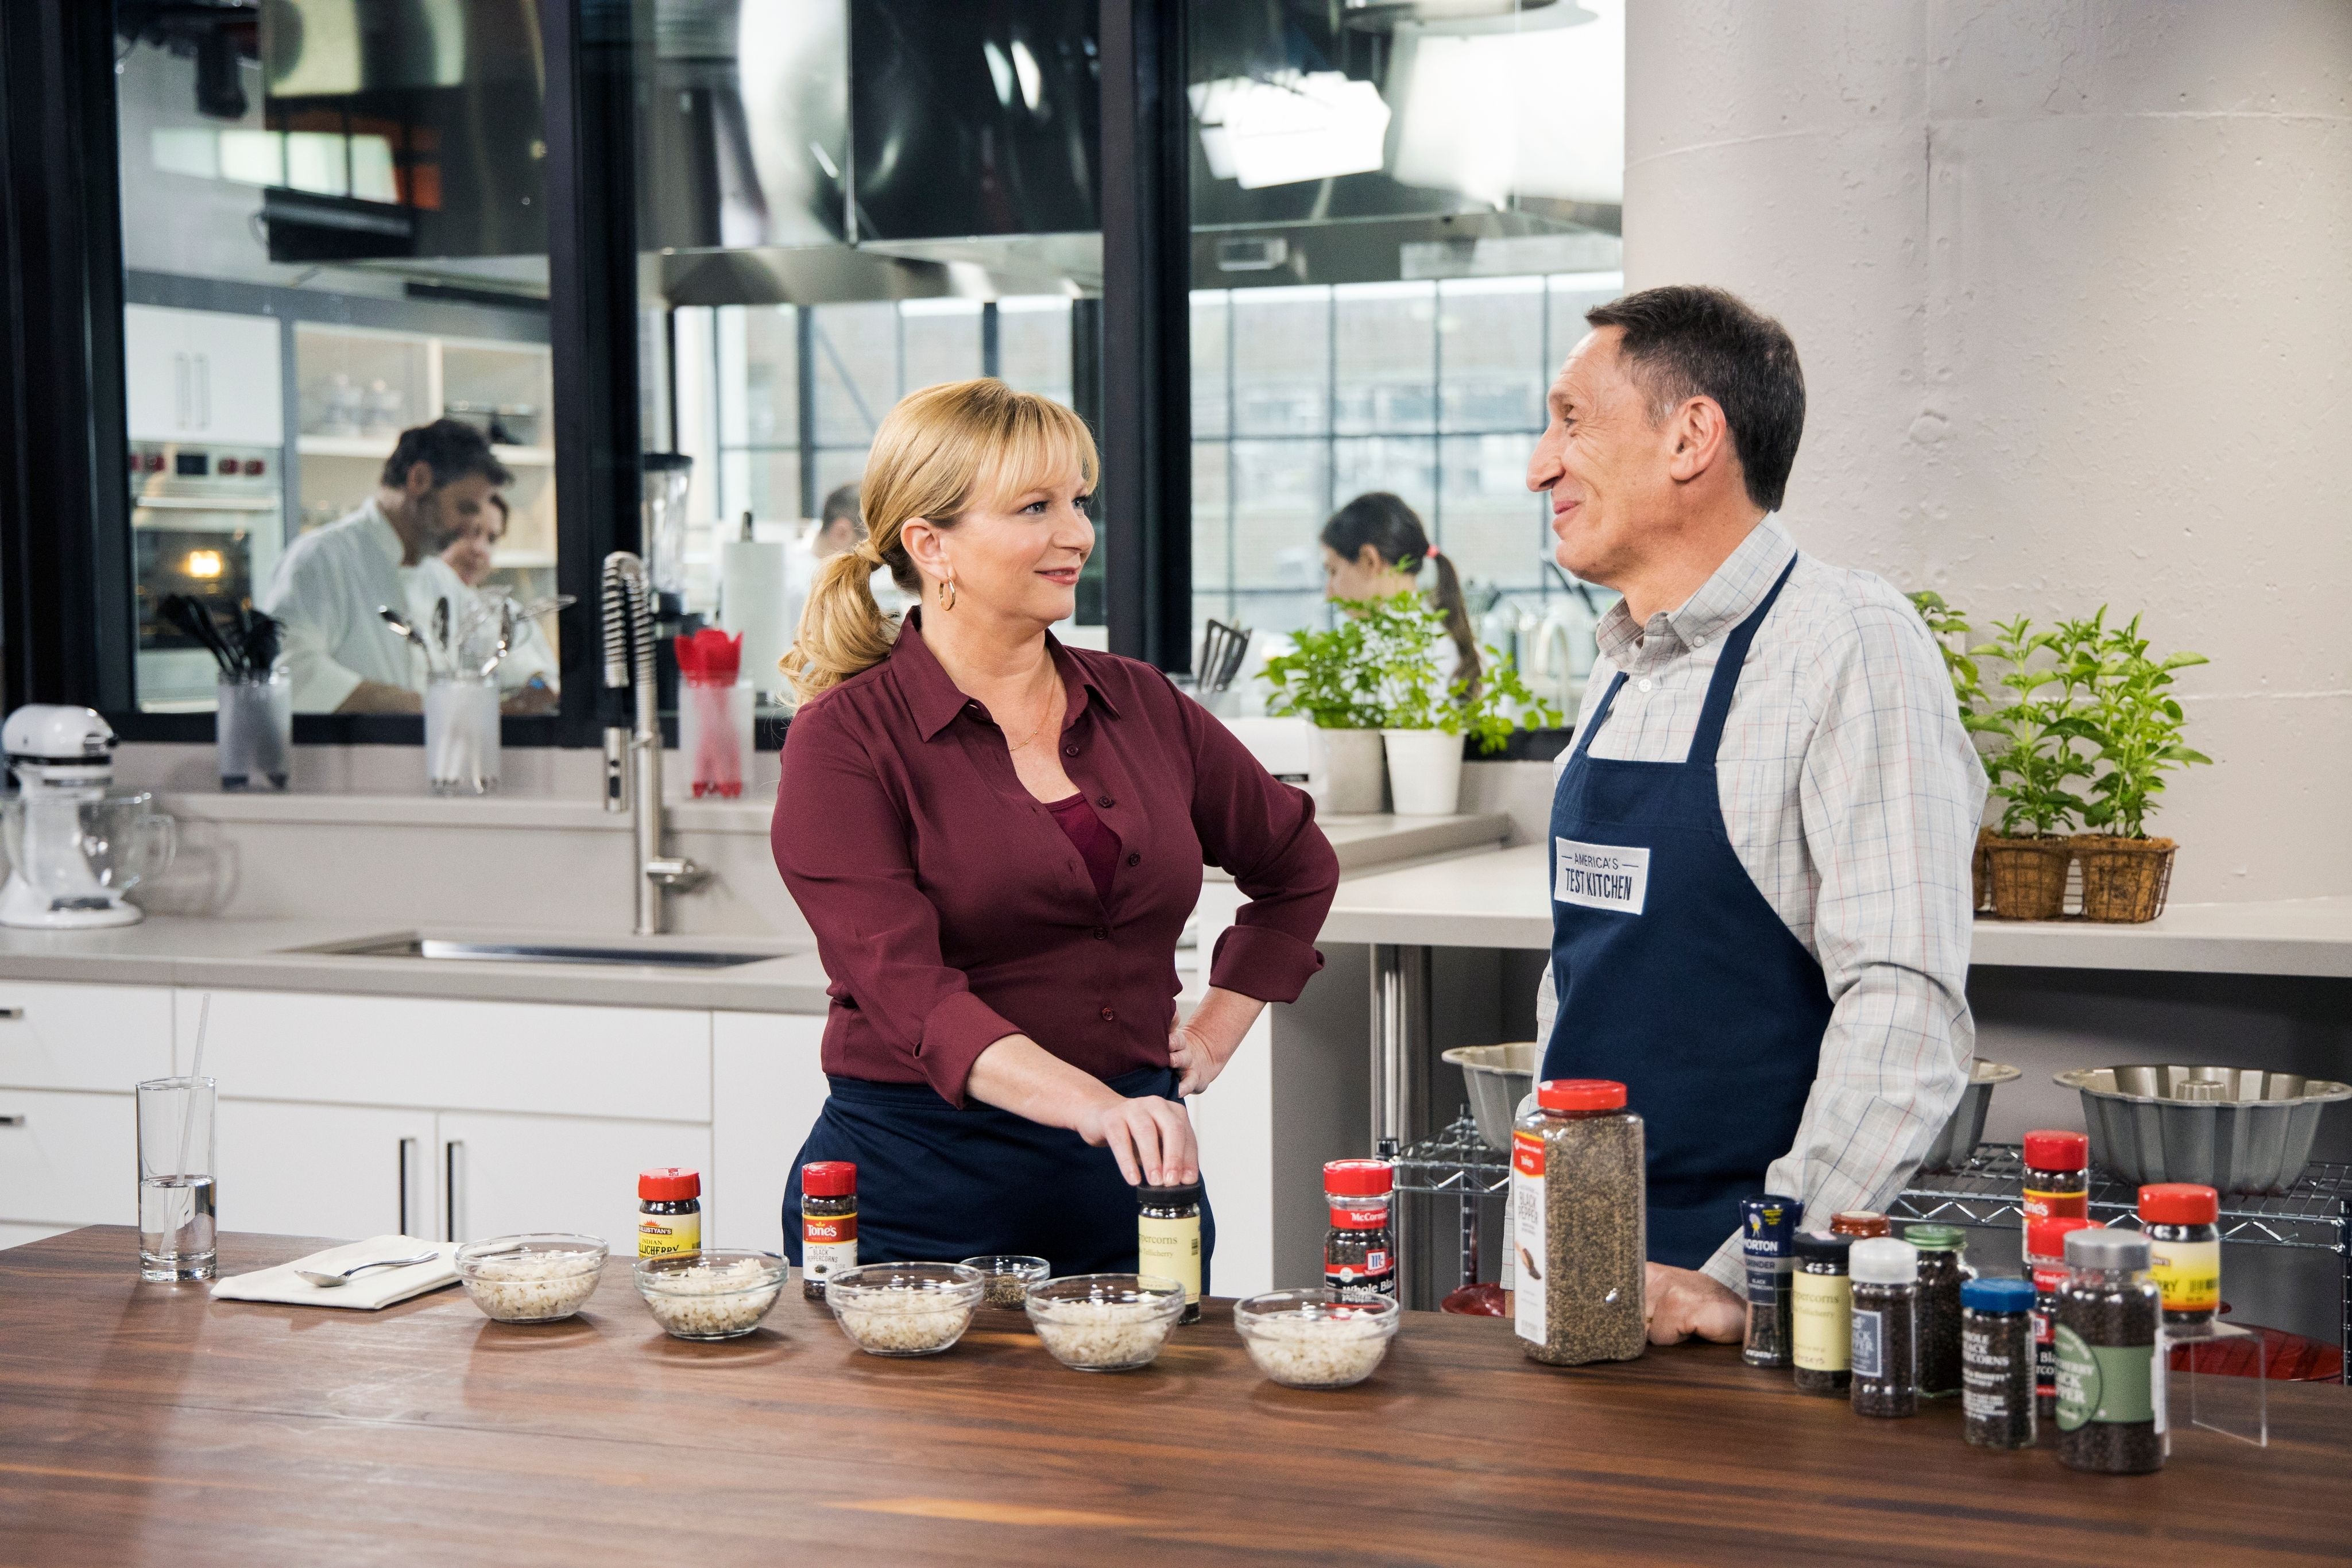 'America's Test Kitchen' has the recipe to hit season 20 | The Seattle Times